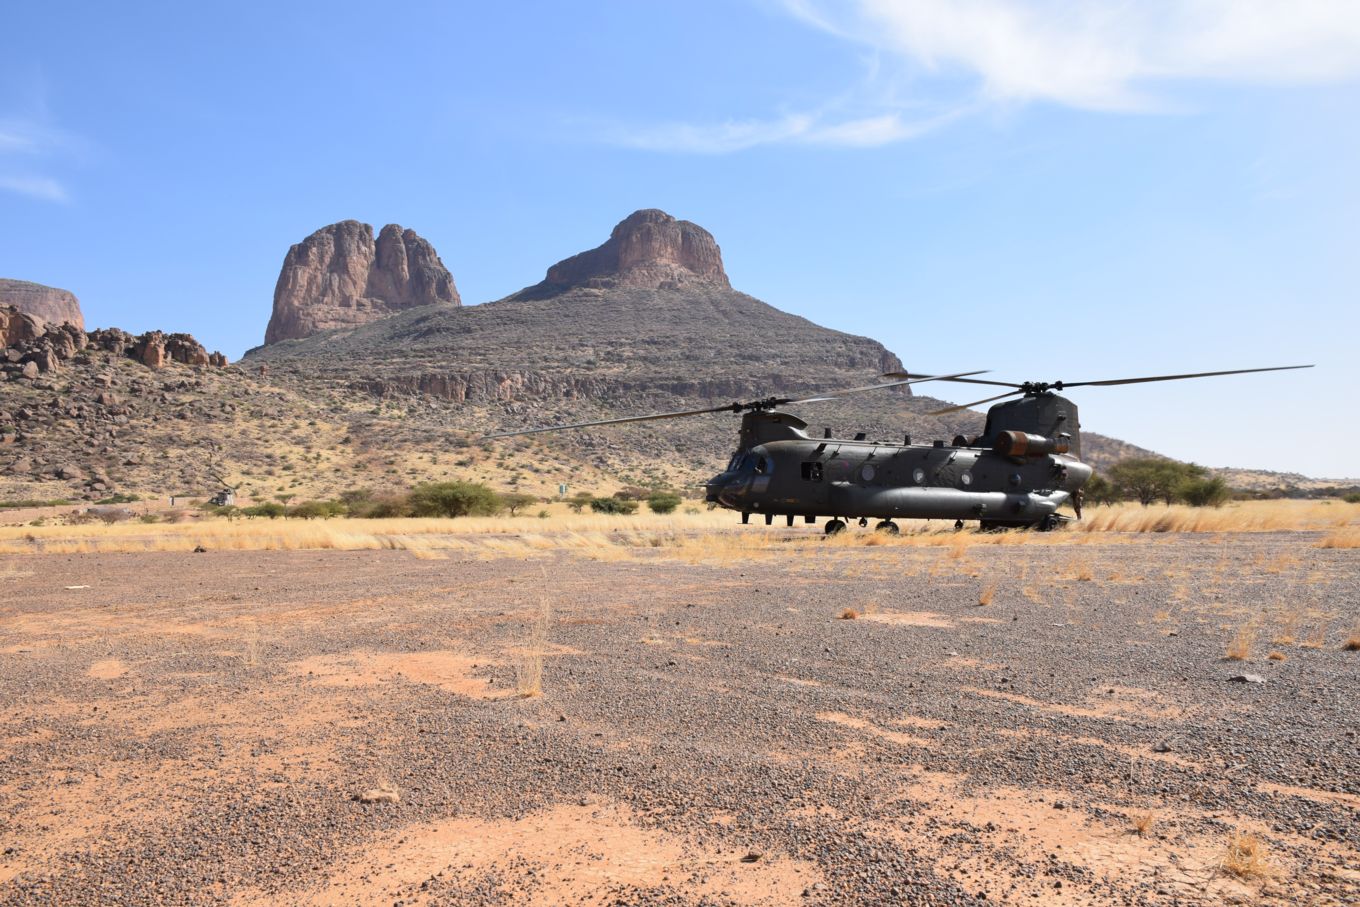 Image shows RAF Chinook on the ground in the desert.